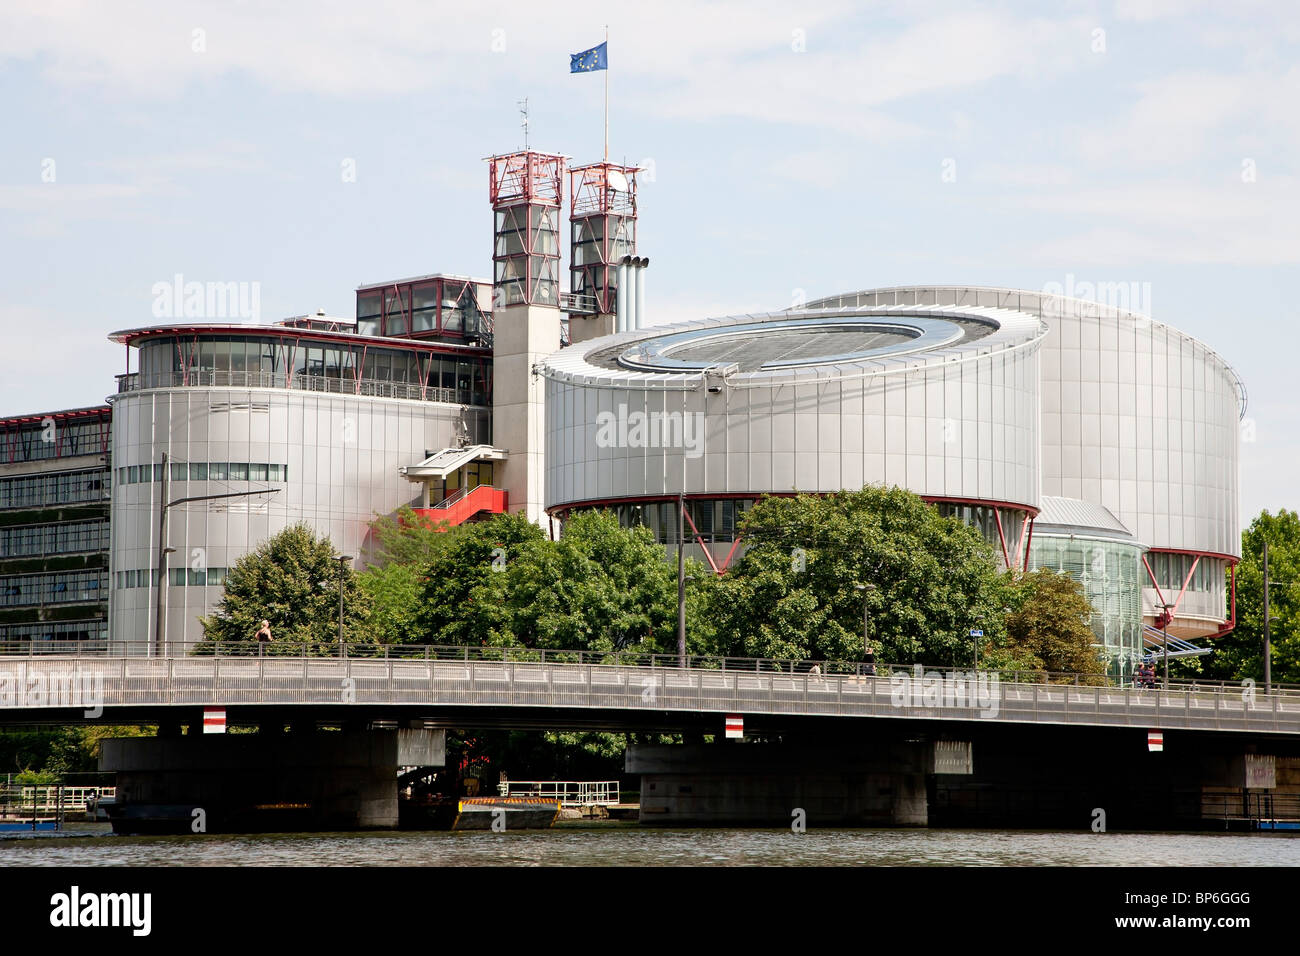 Boat trip along the river at the European Court of Human Rights in Strasbourg, France Stock Photo